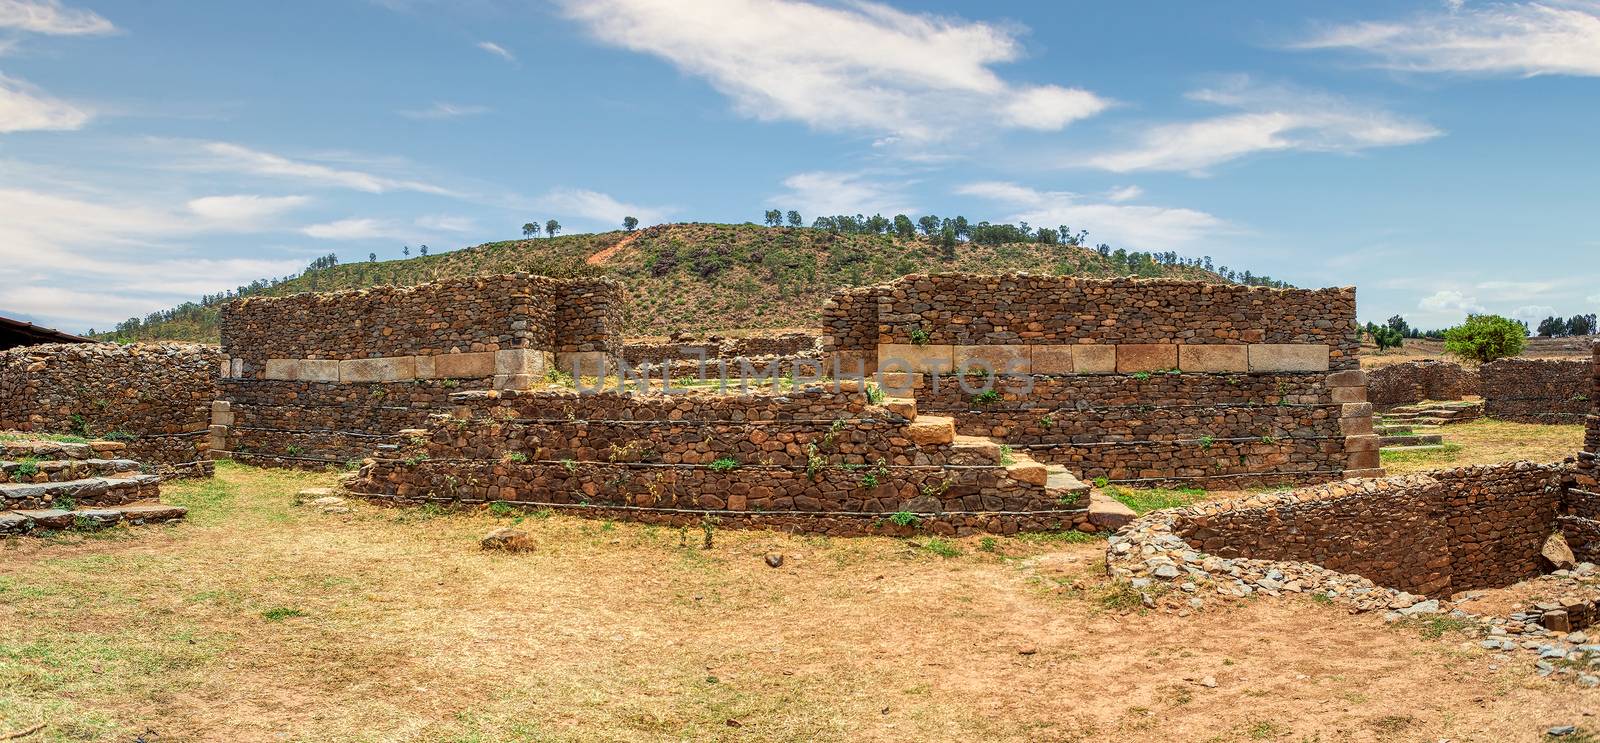 Dungur (or Dungur 'Addi Kilte) is the ruins of a substantial mansion in Aksum, Ethiopia - Ruins of the palace of the Queen Sheba, Aksum civilization at Axum city in Ethiopia. Archeology, on UNESCO world heritage site